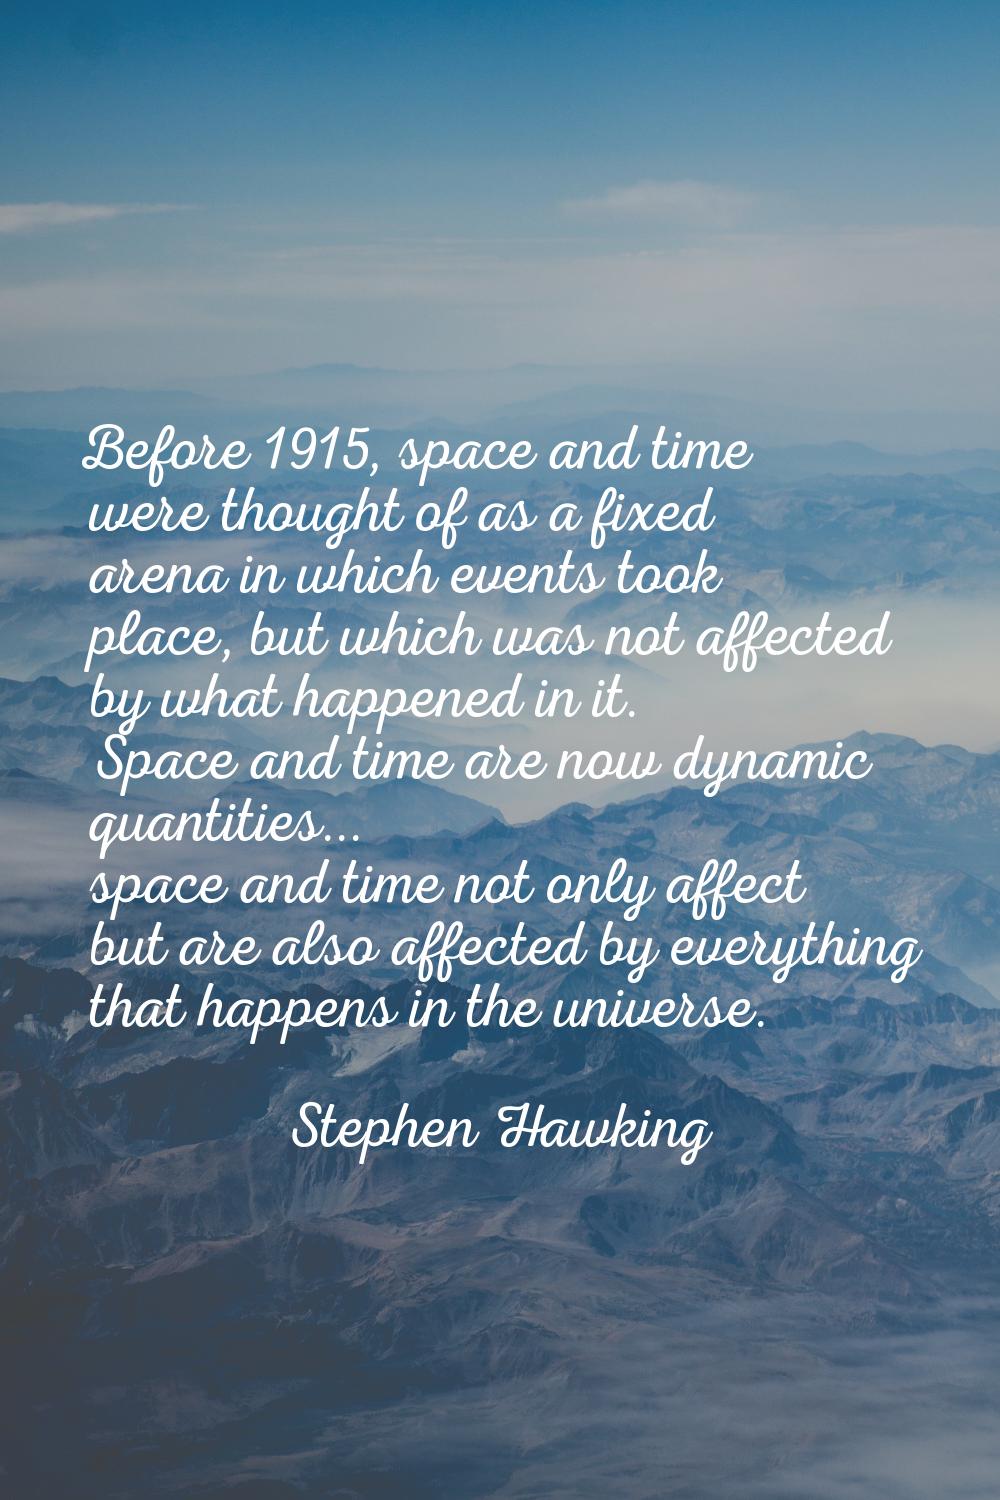 Before 1915, space and time were thought of as a fixed arena in which events took place, but which 